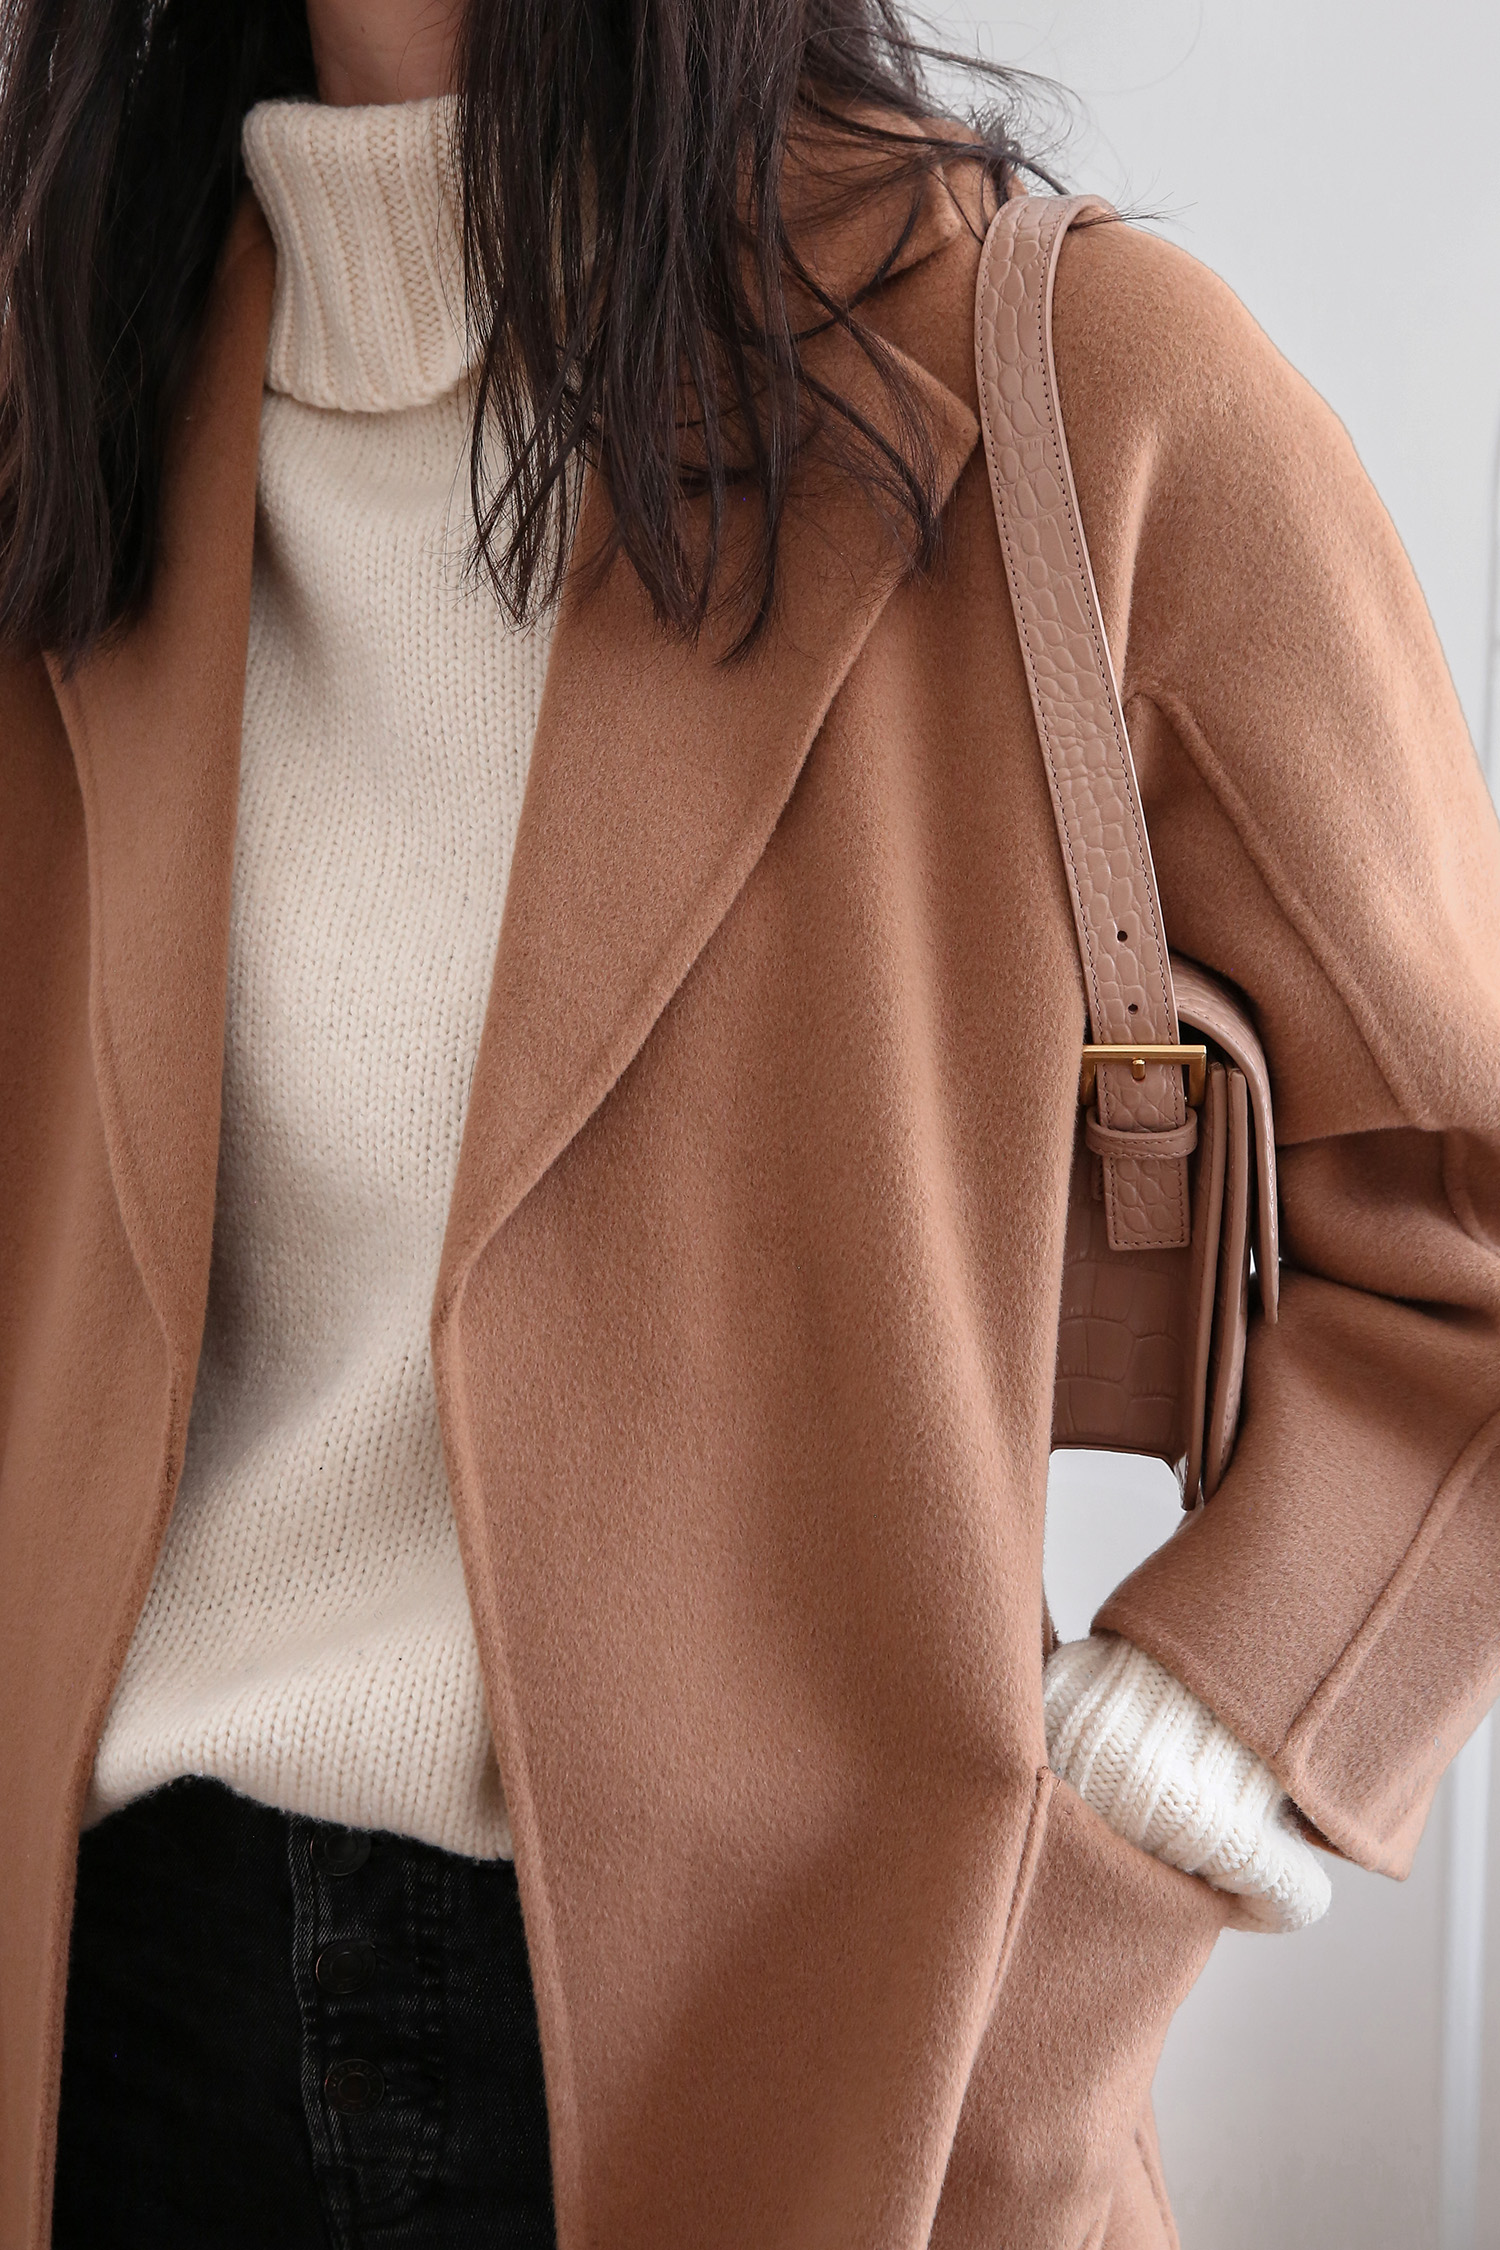 Joseph turtleneck sweater with The Curated Classic Coat and Shoulder Bag